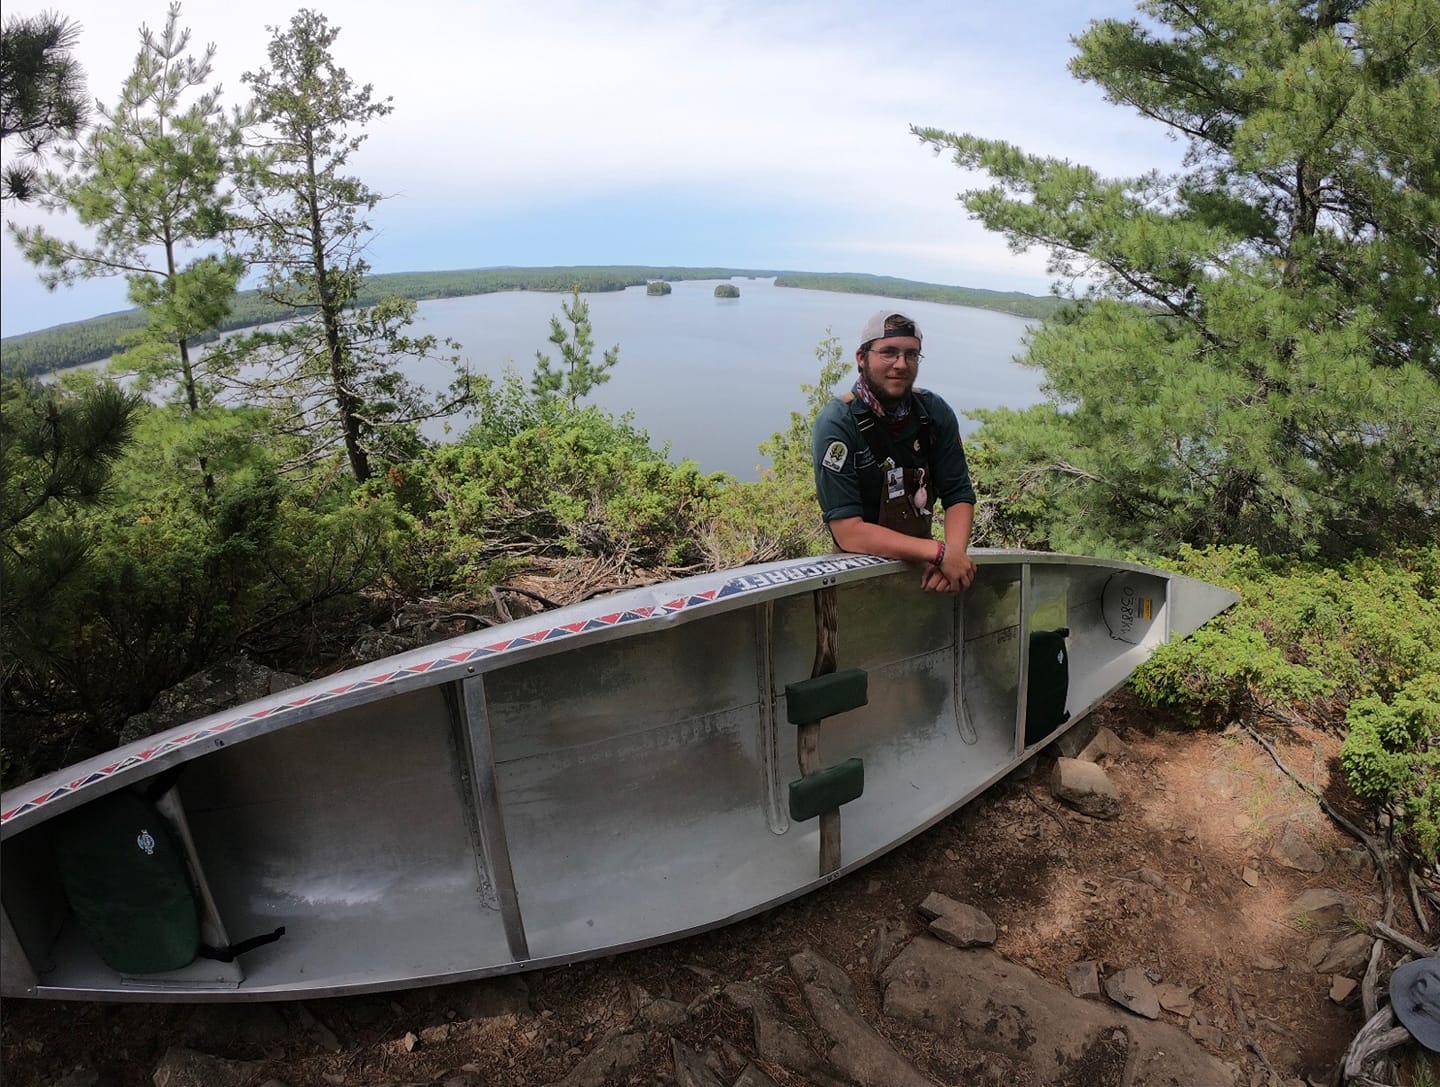 Sam Rogers leaning on a canoe during his trek with OAWV